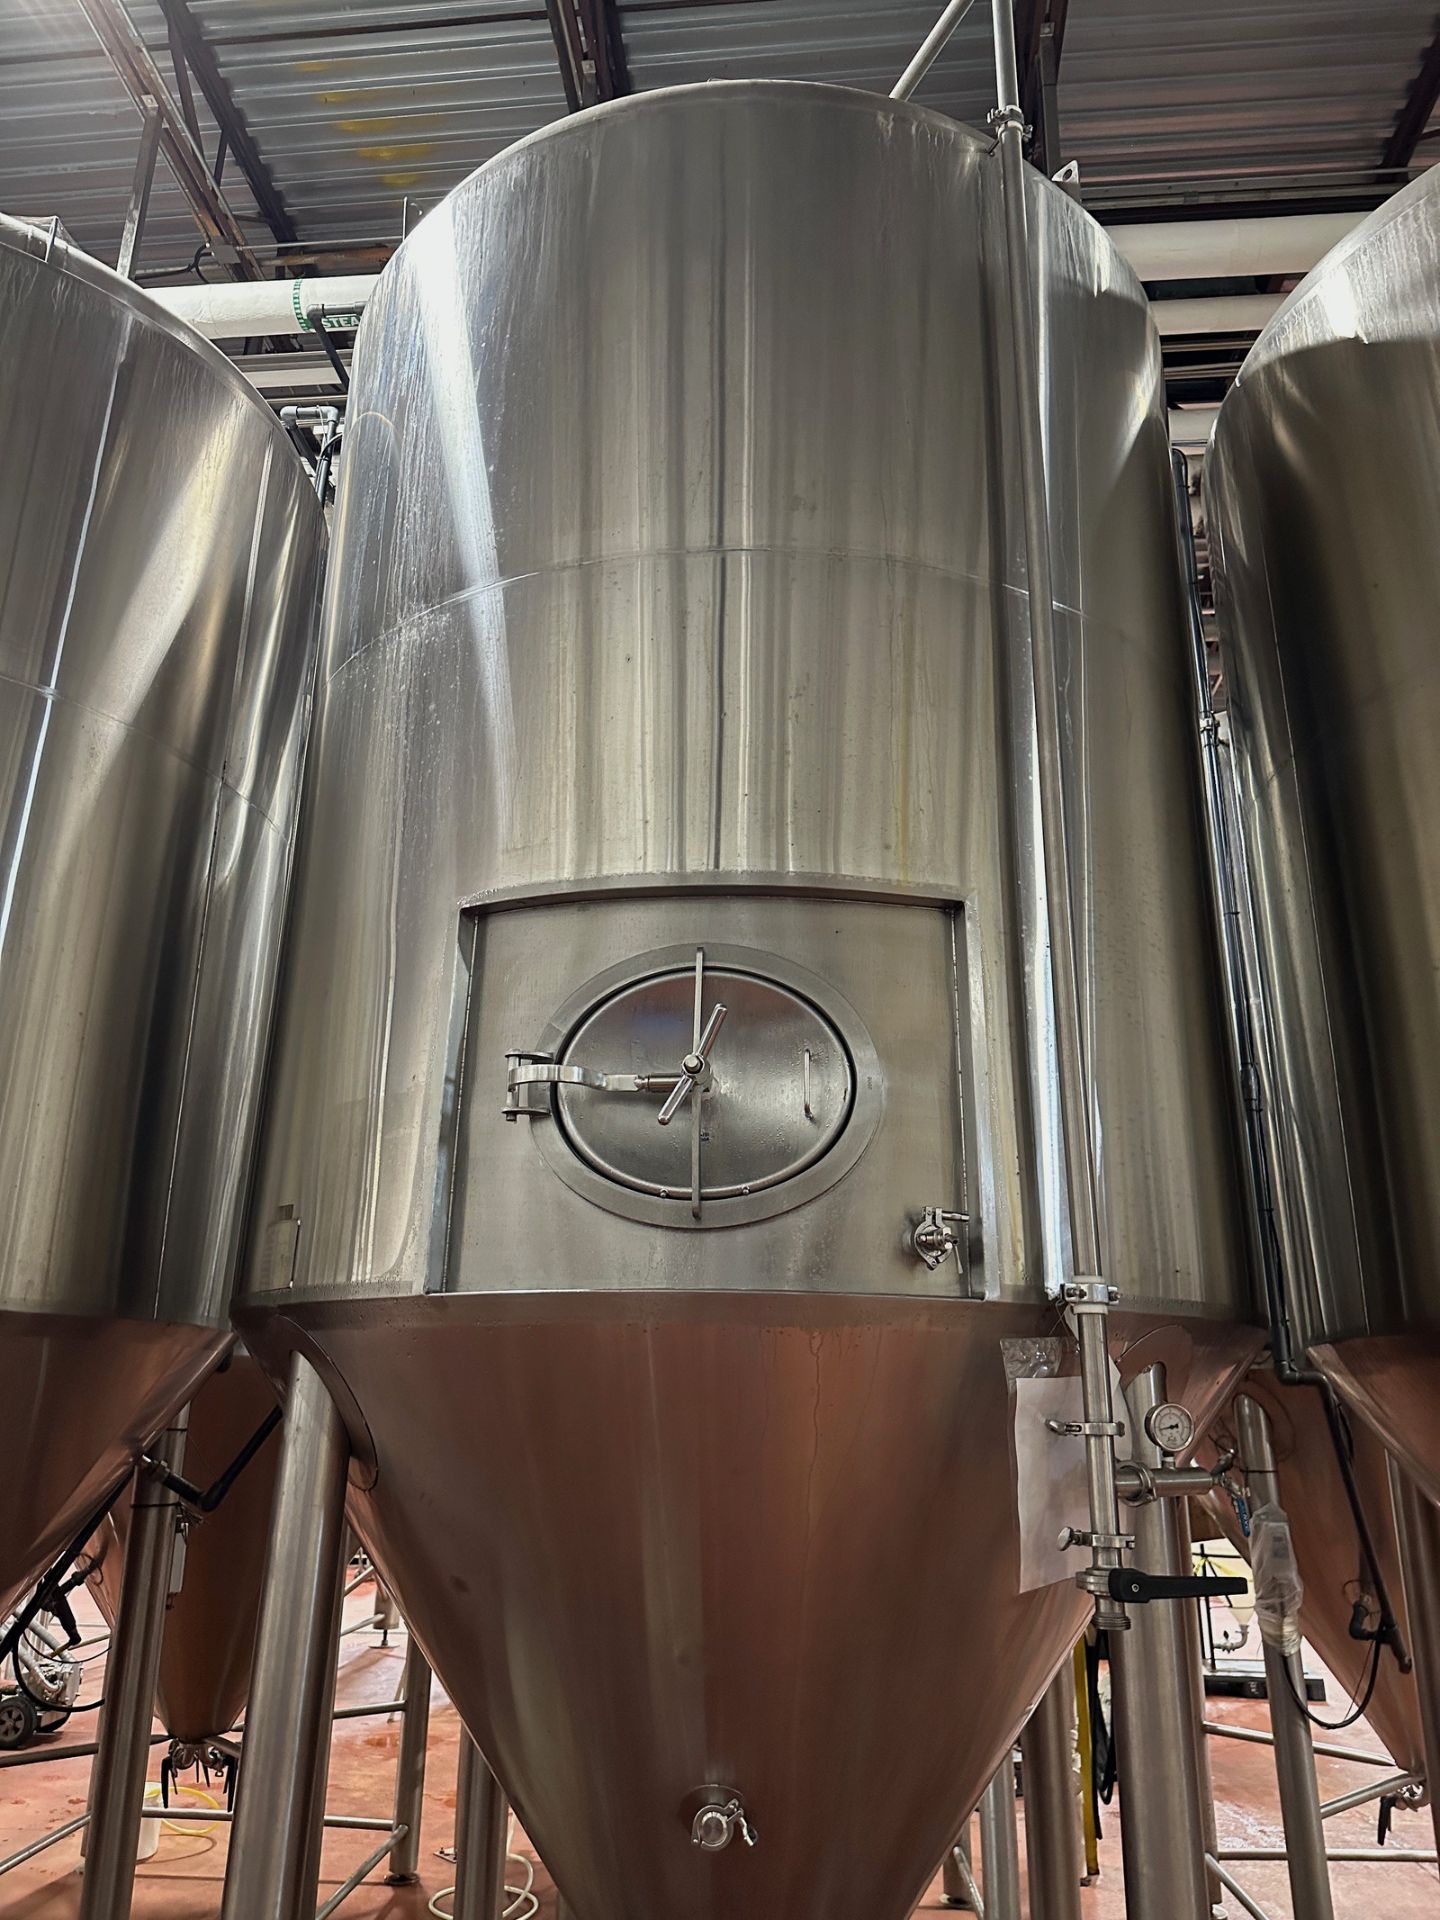 2015 - 60 BBL Specific Mechanical Stainless Steel Fermentation Tank - Cone Bottom, | Rig Fee $1550